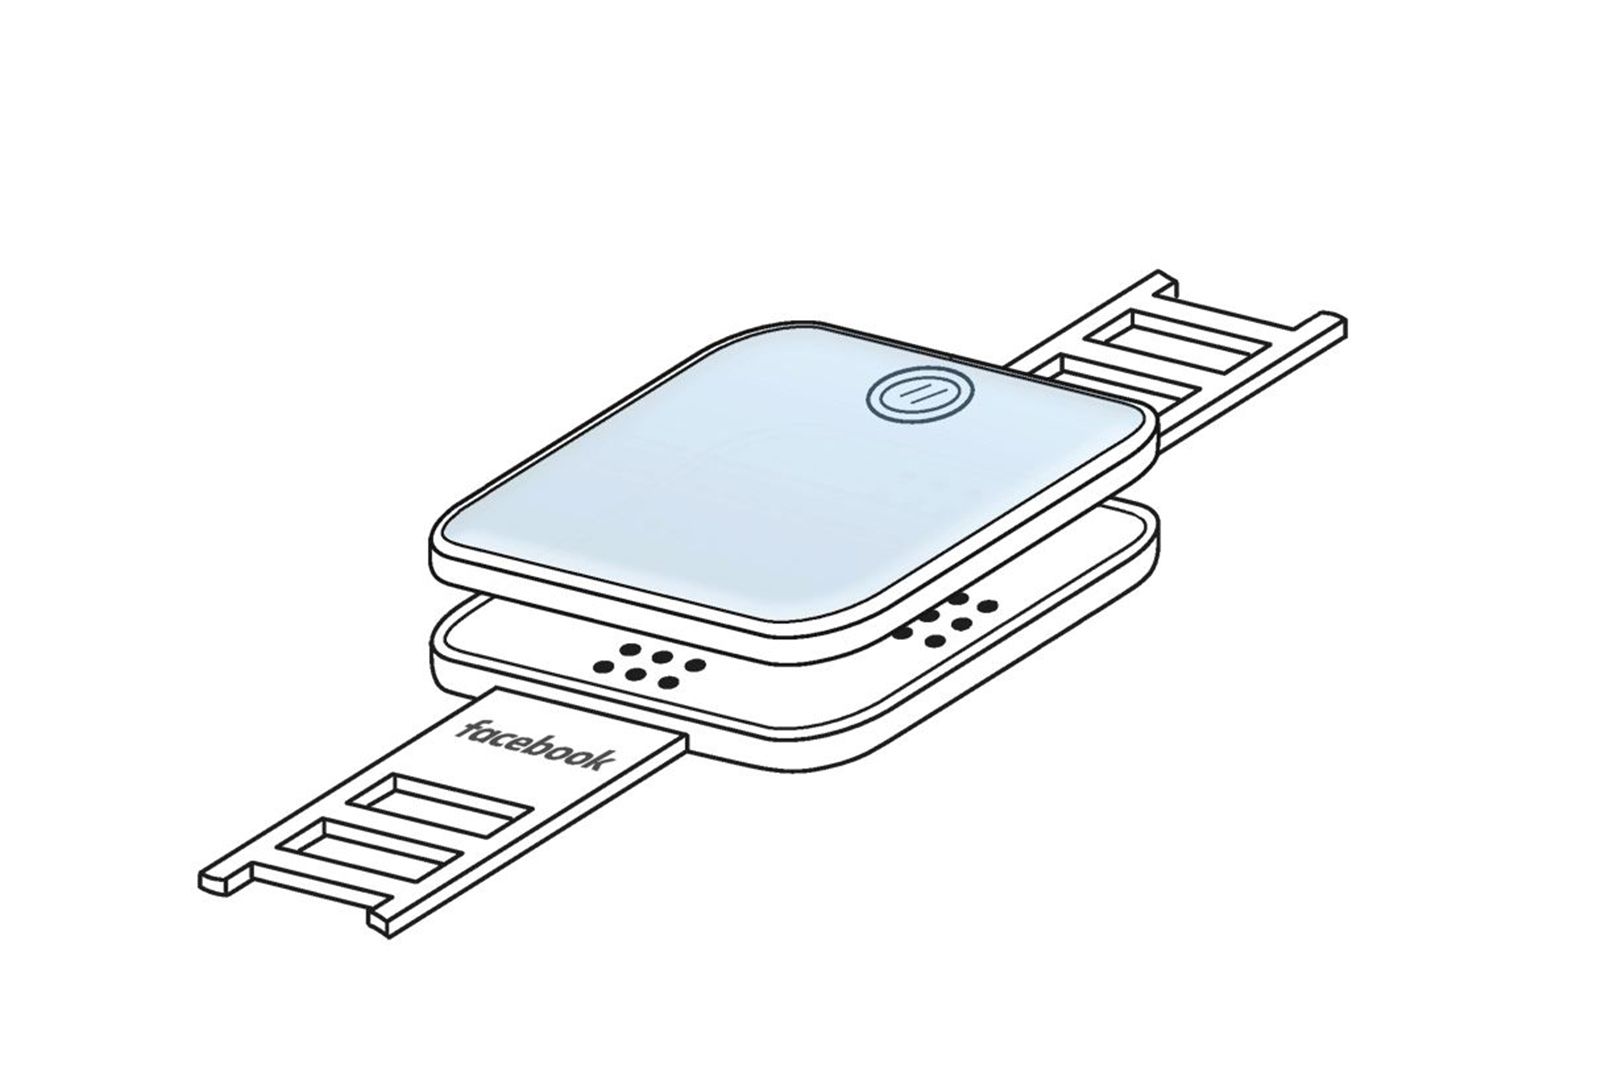 Meta Facebook smartwatch patent shows detachable display and camera photo 1